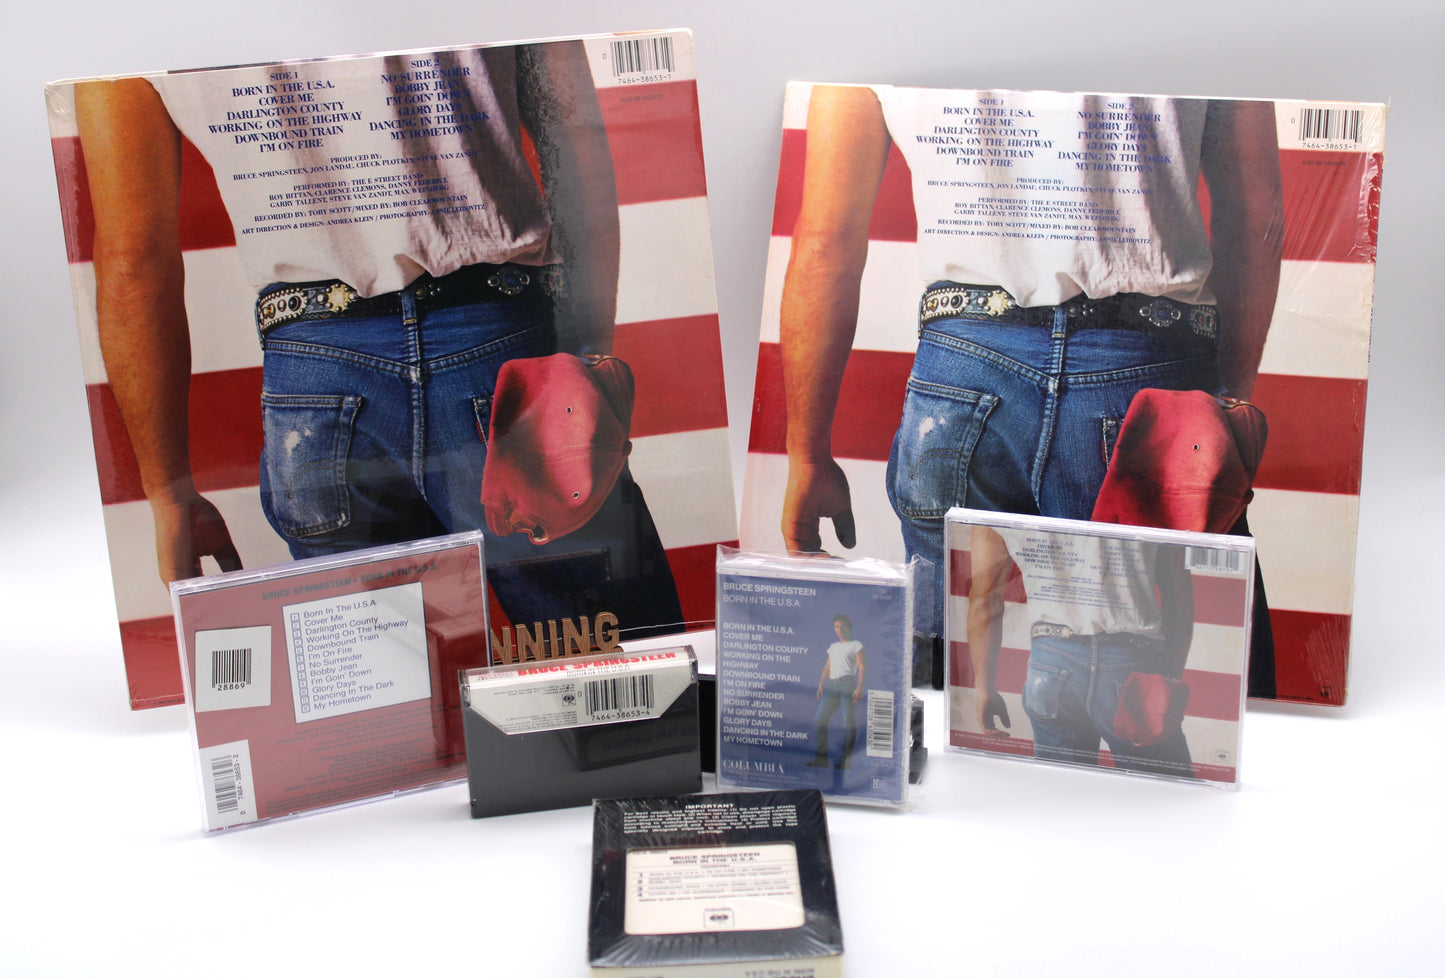 Bruce Springsteen SEALED Born In The USA - 7 Original Releases 1984 - Sealed as New - Multiple Formats Vinyl, 8 Track, Cassette, MD, CD